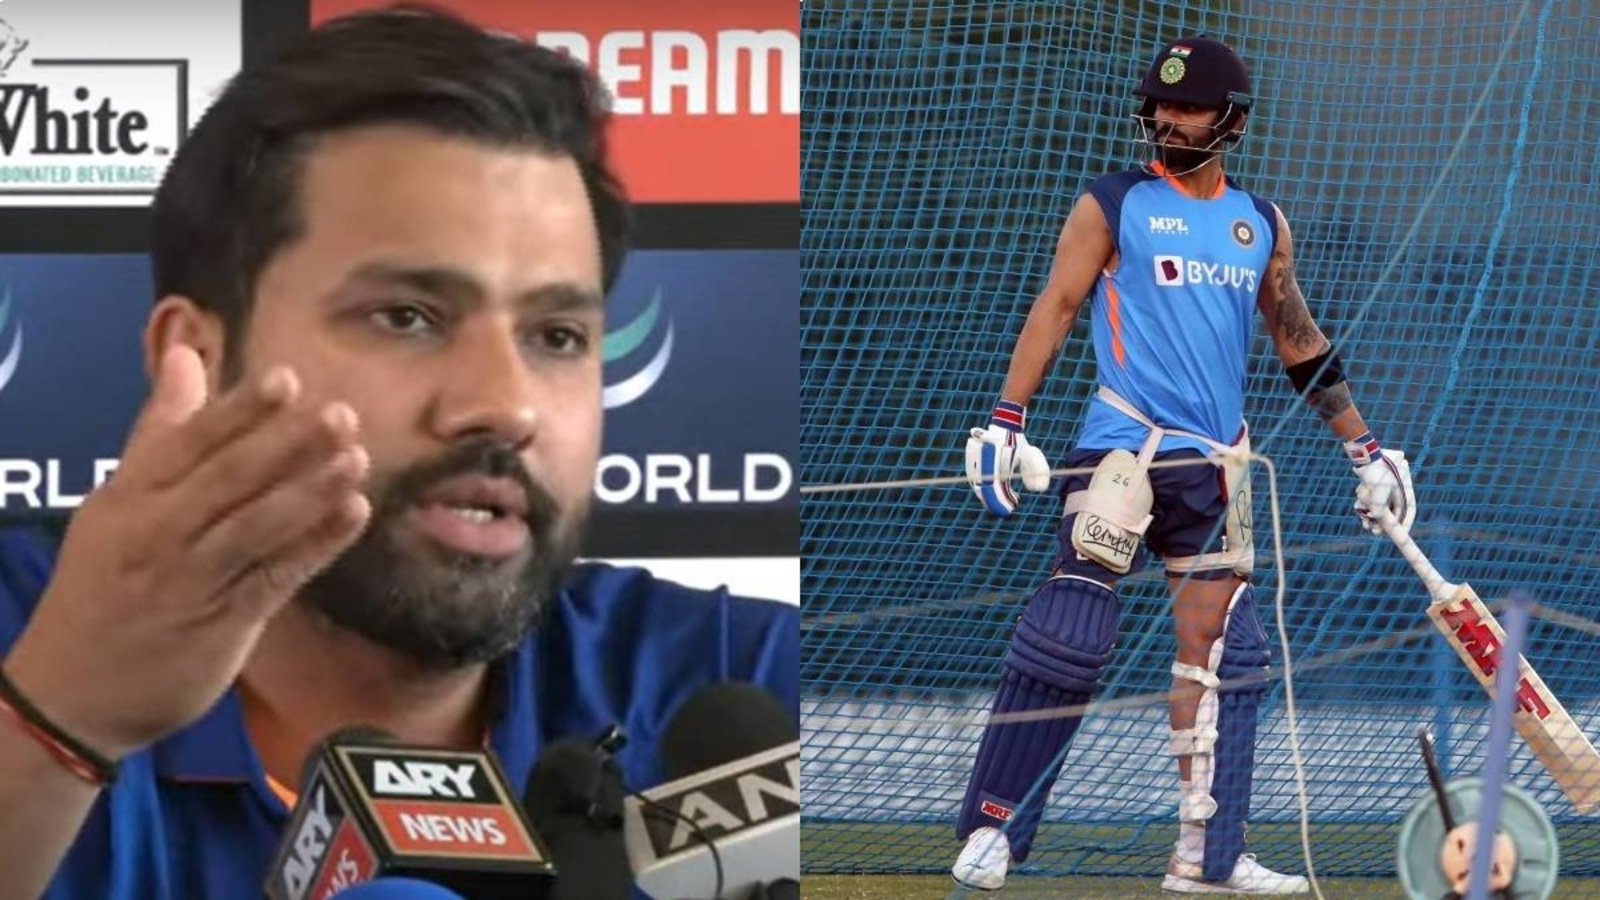 rohit-sharma-gives-verdict-on-kohli-s-form-ahead-of-ind-return-didn-t-notice-any-extraordinary-changes-he-s-the-same